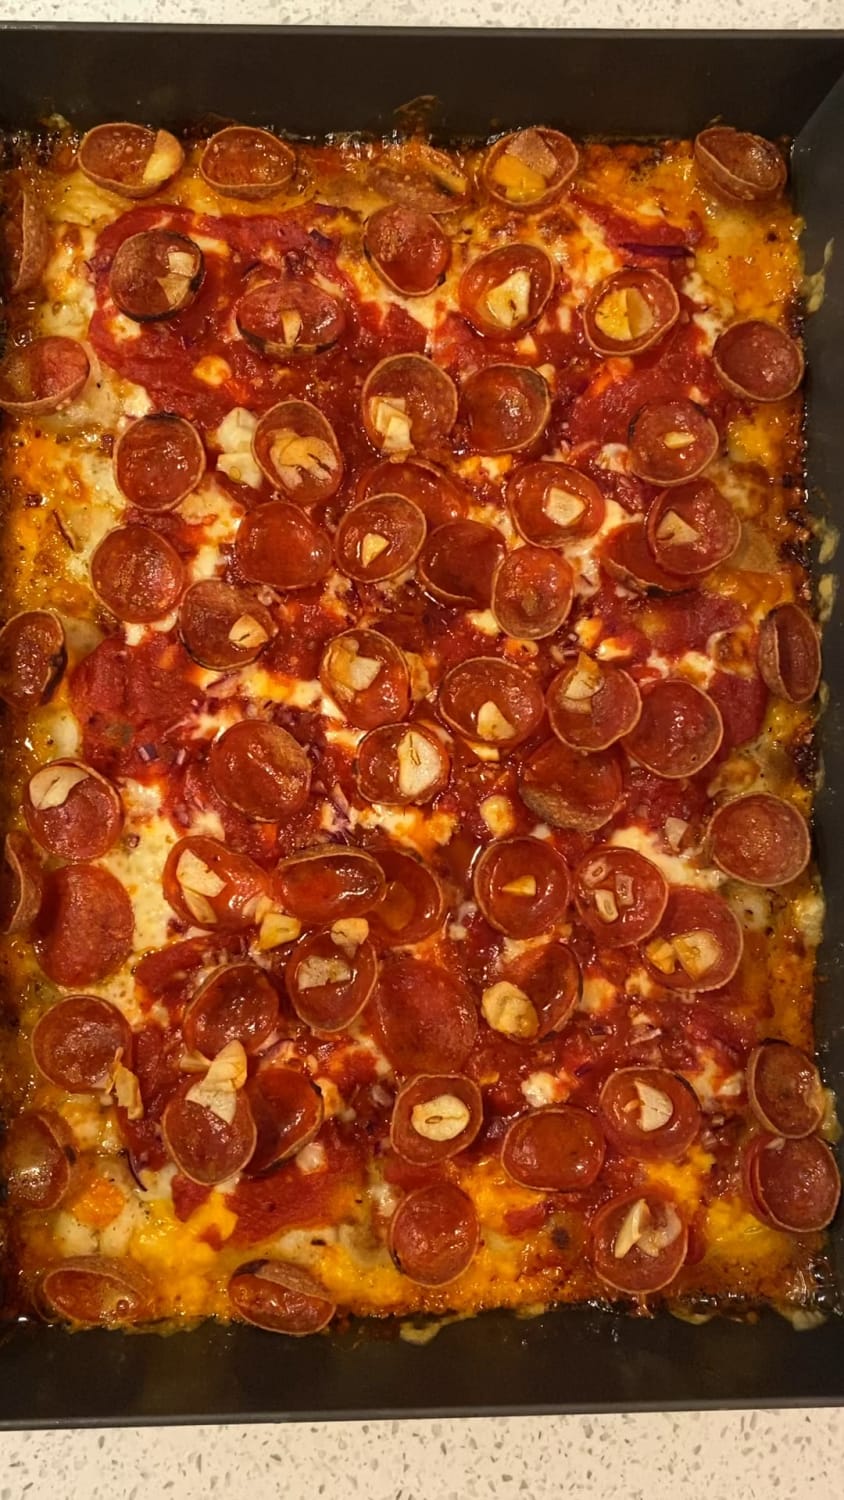 Love that sizzle when it comes out of the oven - Detroit pizza with pepperoni, garlic, and red onion